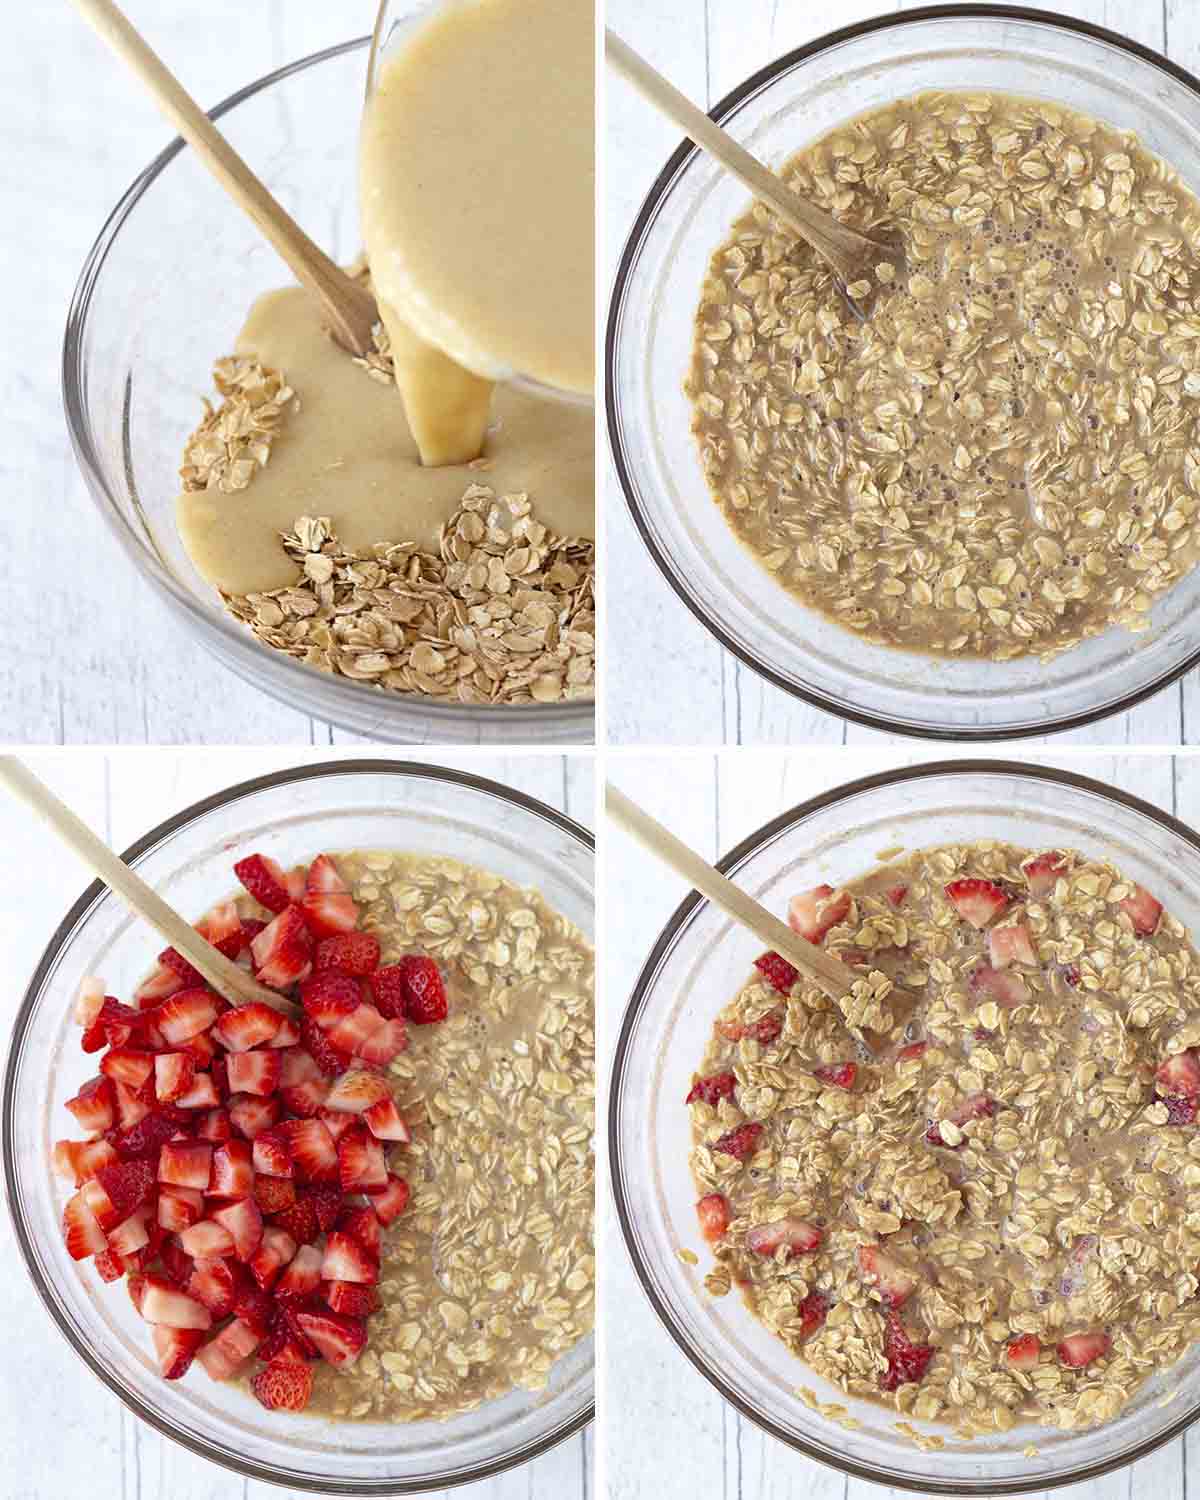 A collage of four images showing the sequence of steps needed to make baked oatmeal with strawberries.